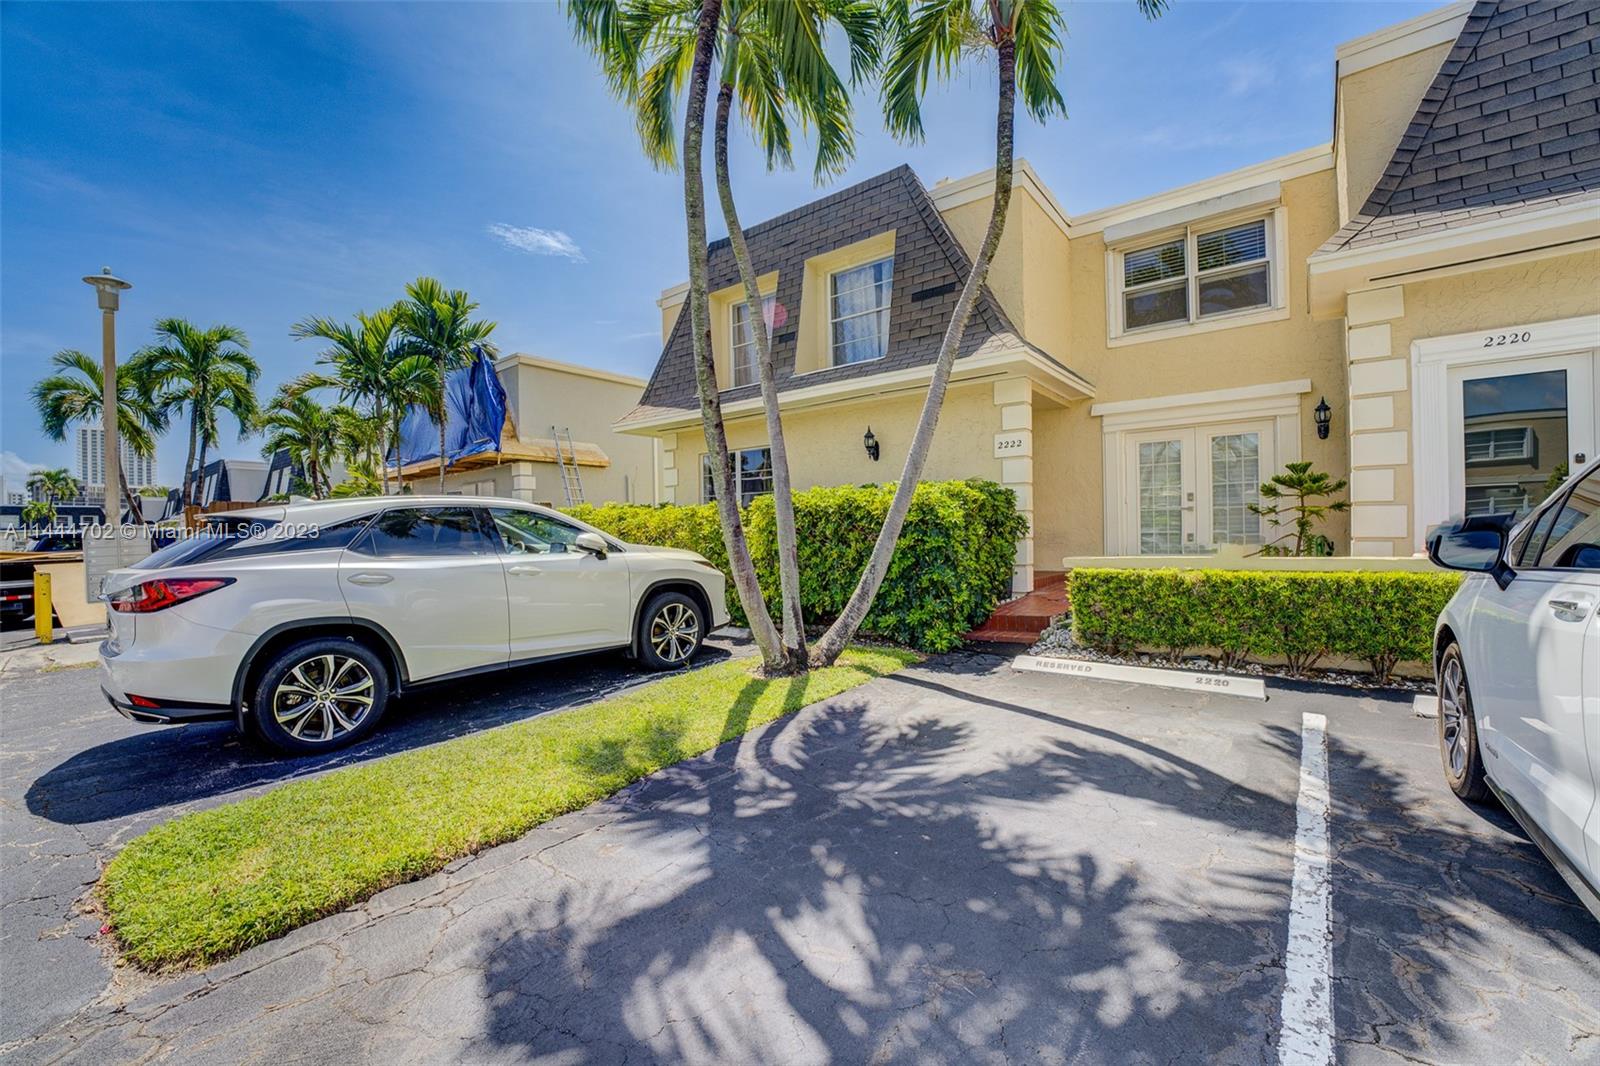 Enjoy comfortable living in this fully renovated 3 bedroom 2.5 bathroom 2083 sq.ft. corner townhouse In Venetian Park Hallandale. Largest model in community. The open-plan kitchen, oversized closets, new appliances, private balcony and private patio provides convenience and style. With quality finishes and maximum natural light access, this home offers modern living at its finest. 
Community offers pool, tennis courts, sauna. HOA payments include water, sewer, internet, cable, landscaping. 
Can be rented right away. Pet friendly. 
Close to highway, beaches, restaurants, next to park with playground, basketball court, dog park. 2 parking spaces and guest parking available